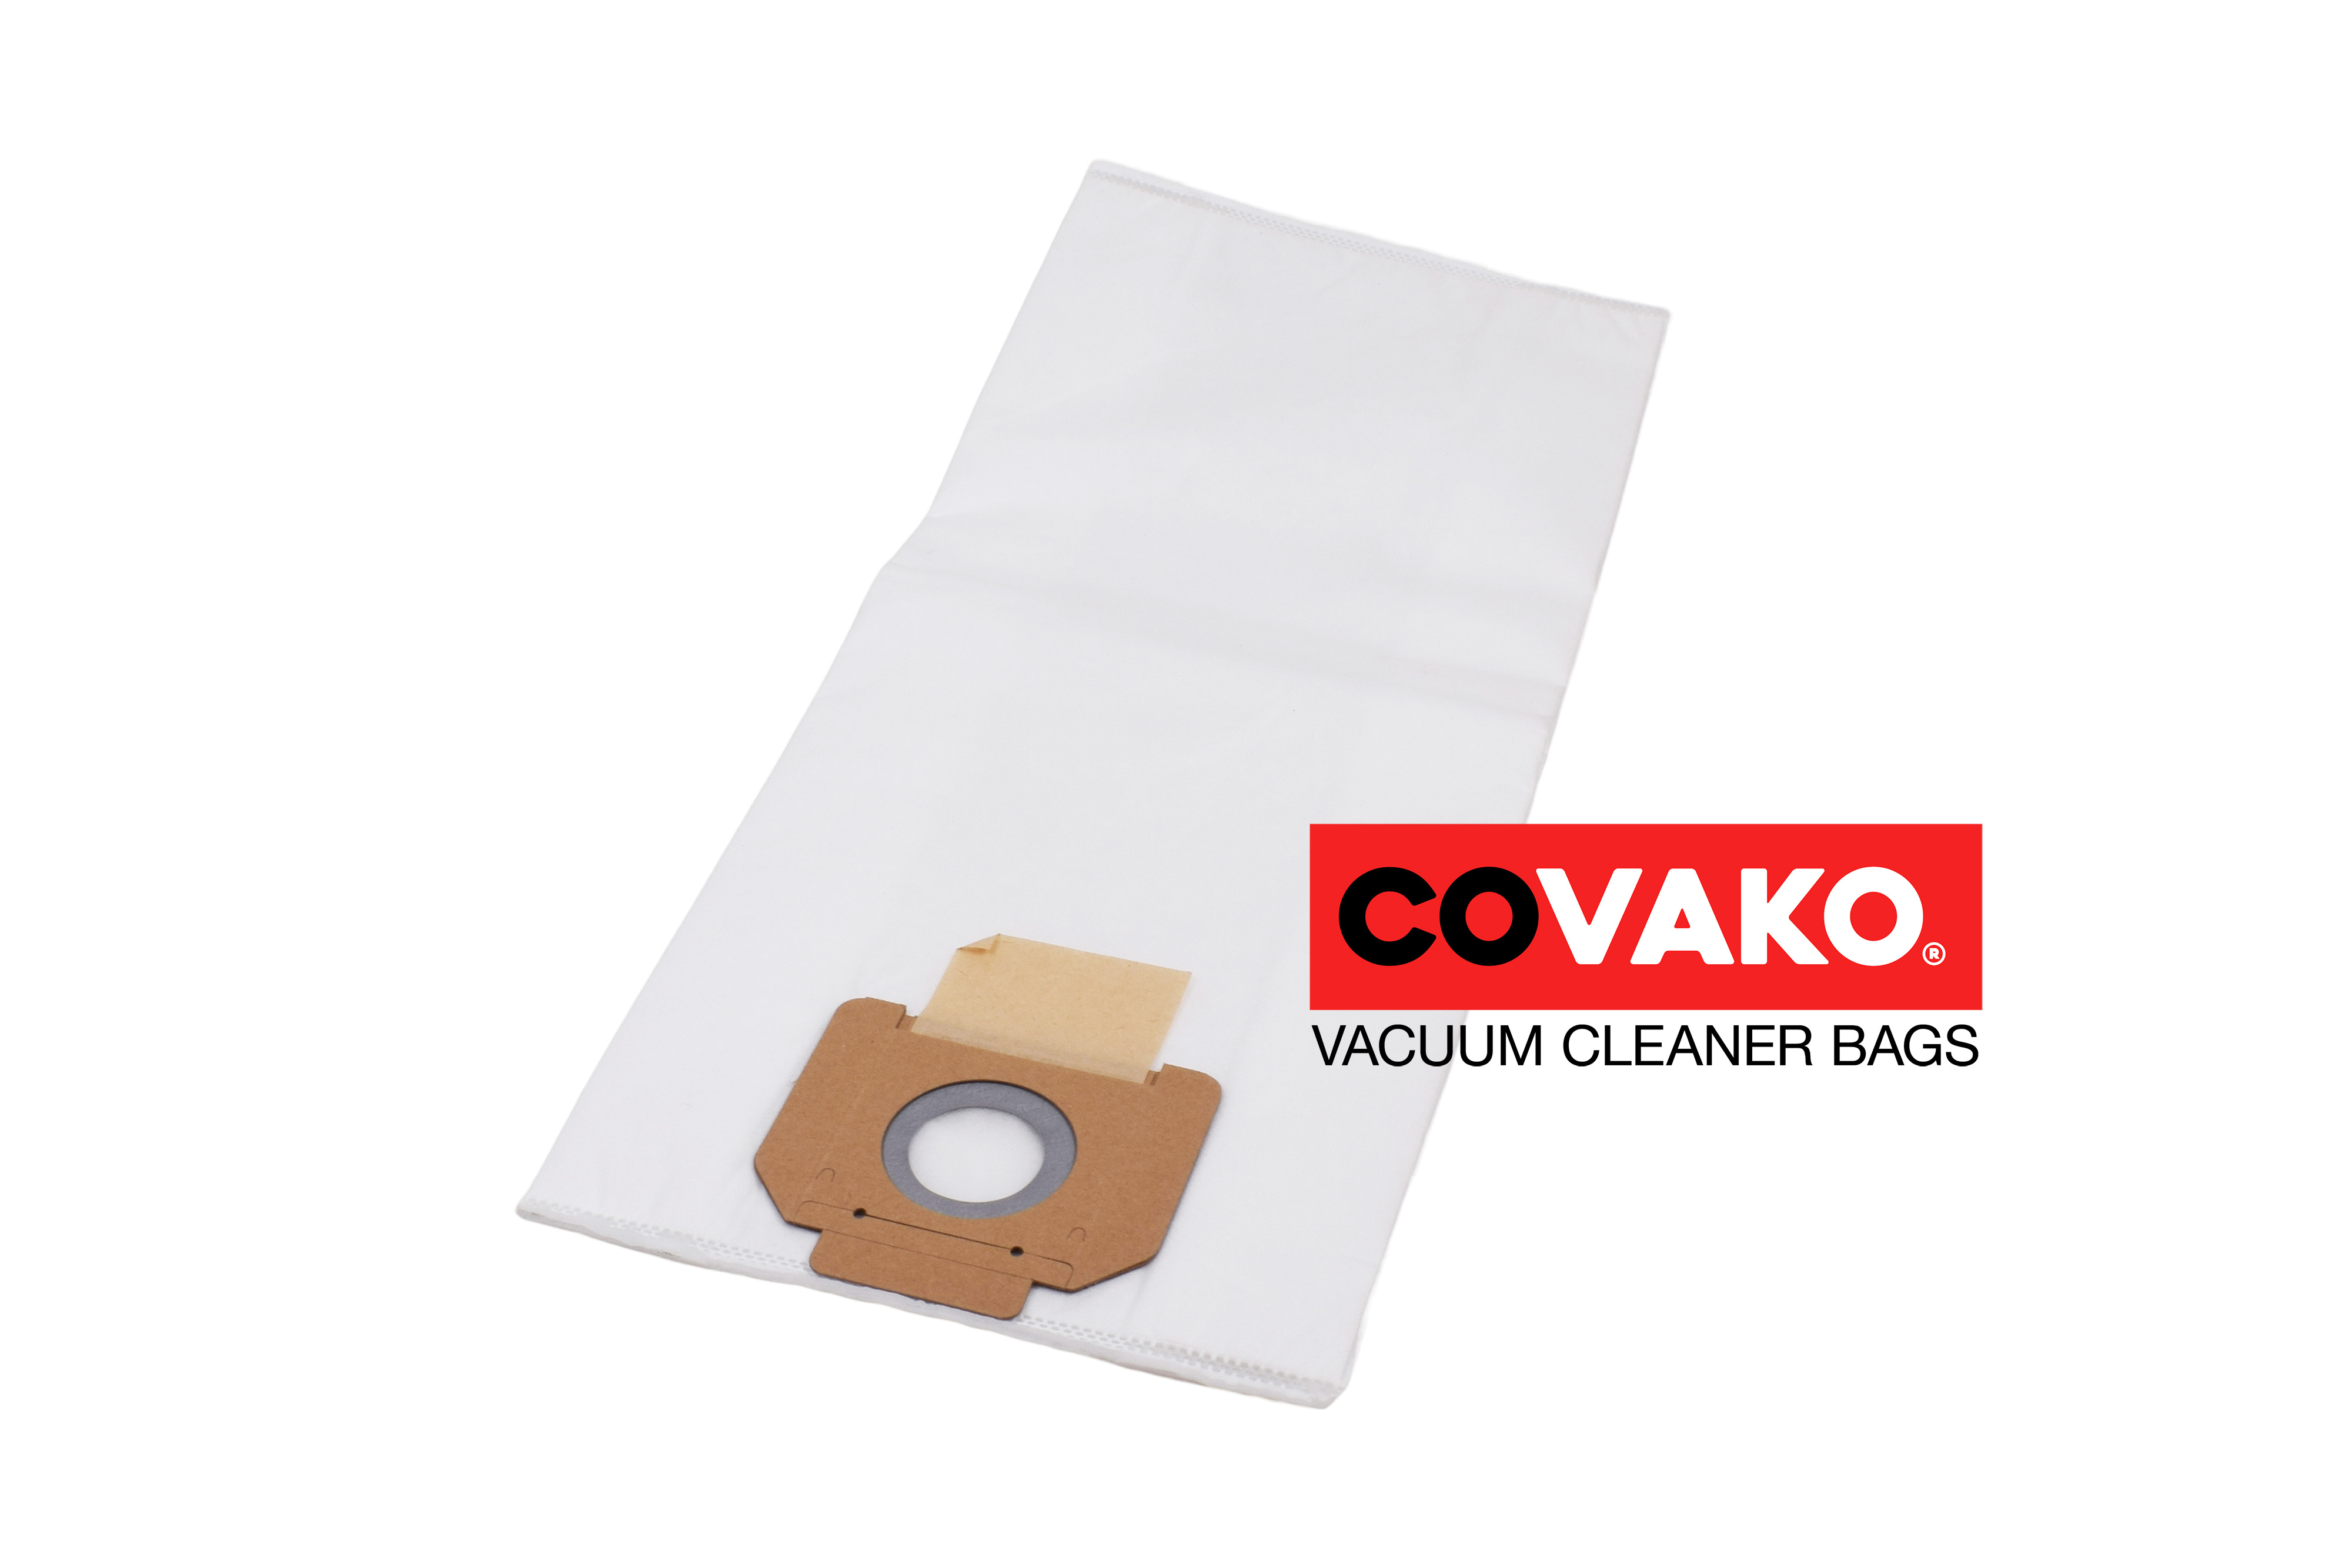 ICA GP 1/35 W&D / Synthesis - ICA vacuum cleaner bags